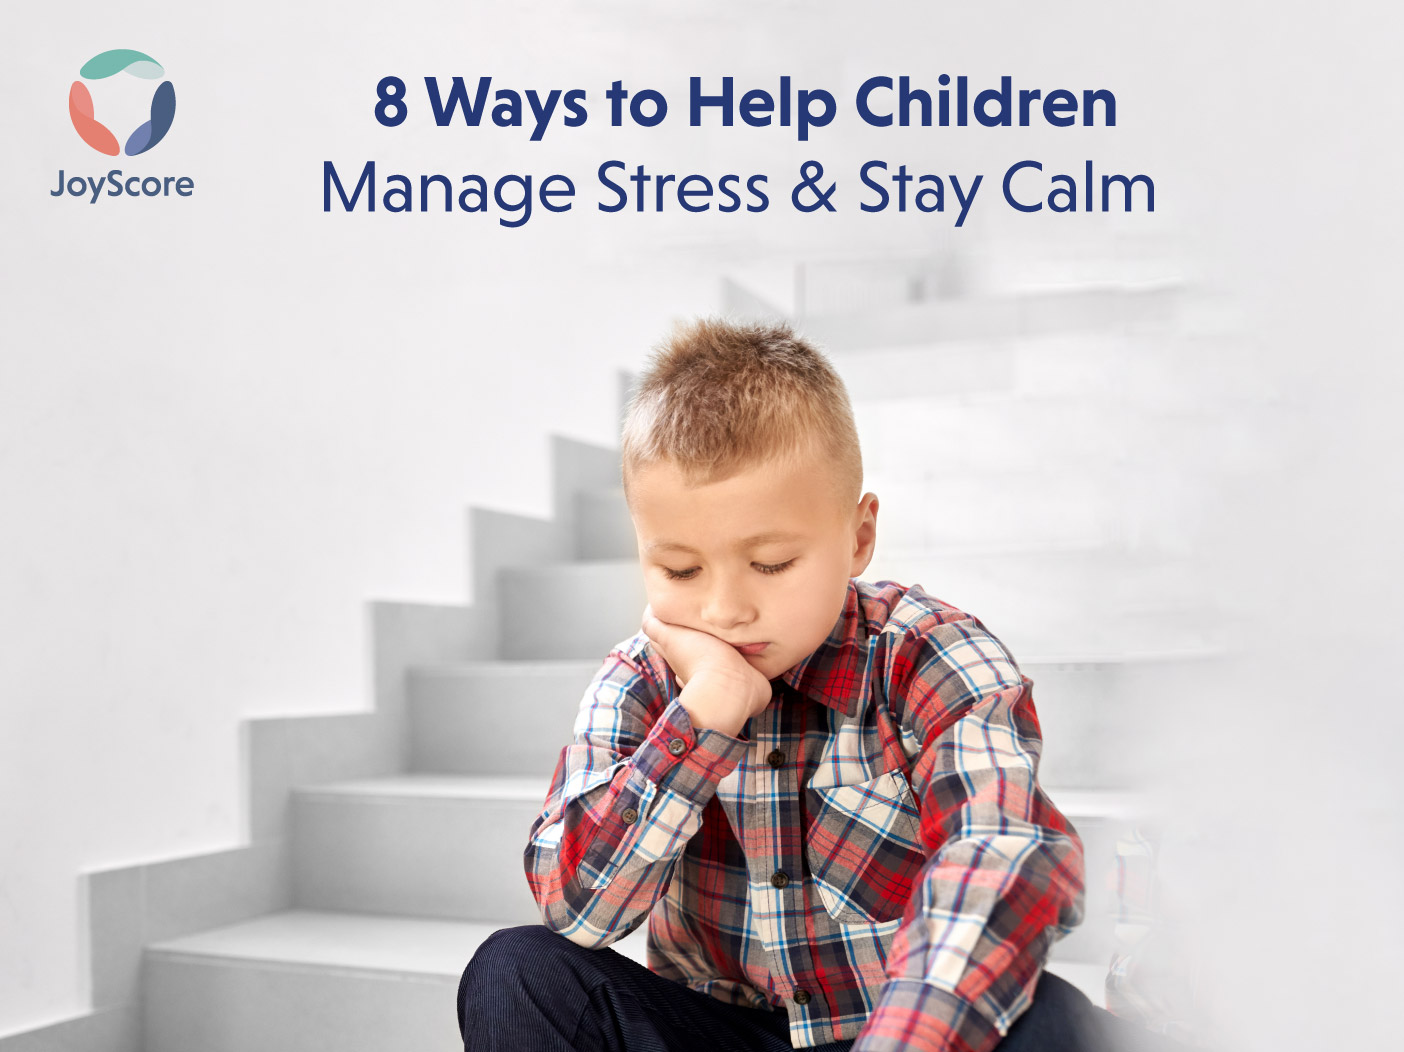 How to Help Children Manage Stress: 8 Ways to Help Them Stay Calm